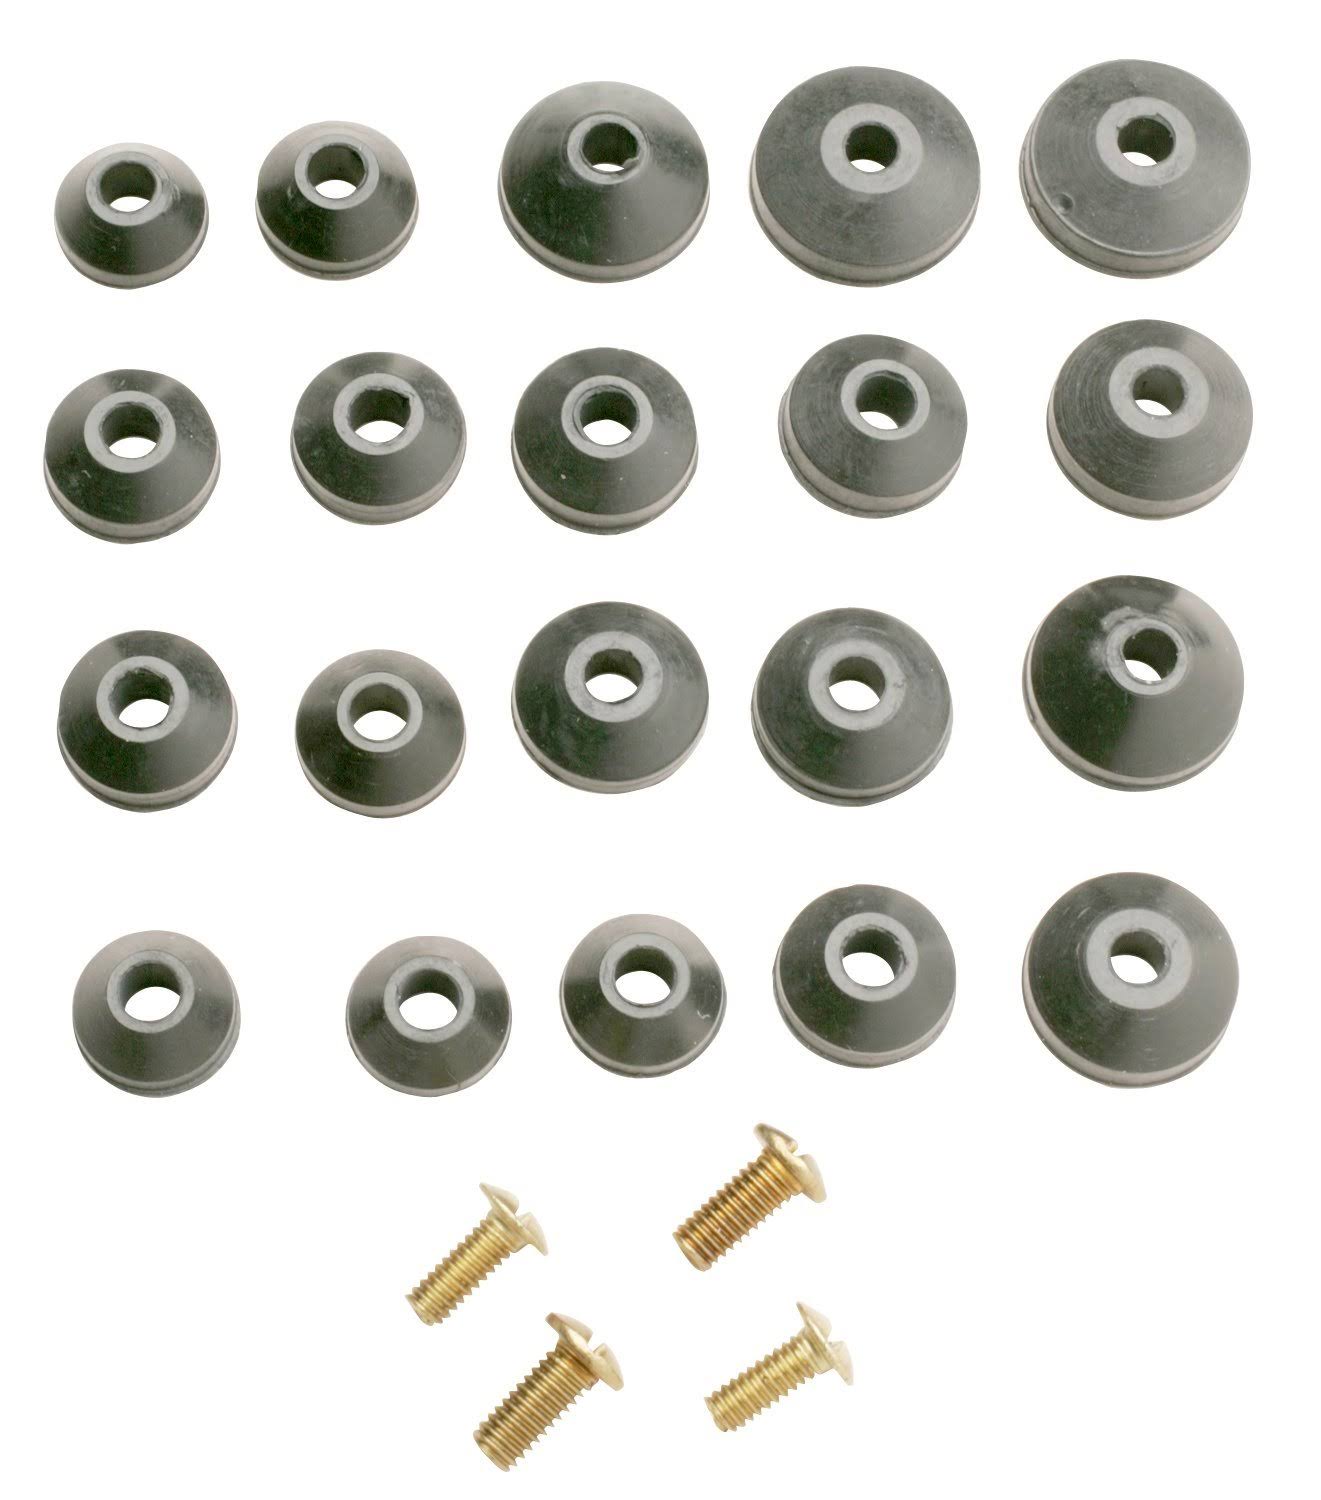 Plumb Pak Pp805-22 Faucet Washers - Assorted